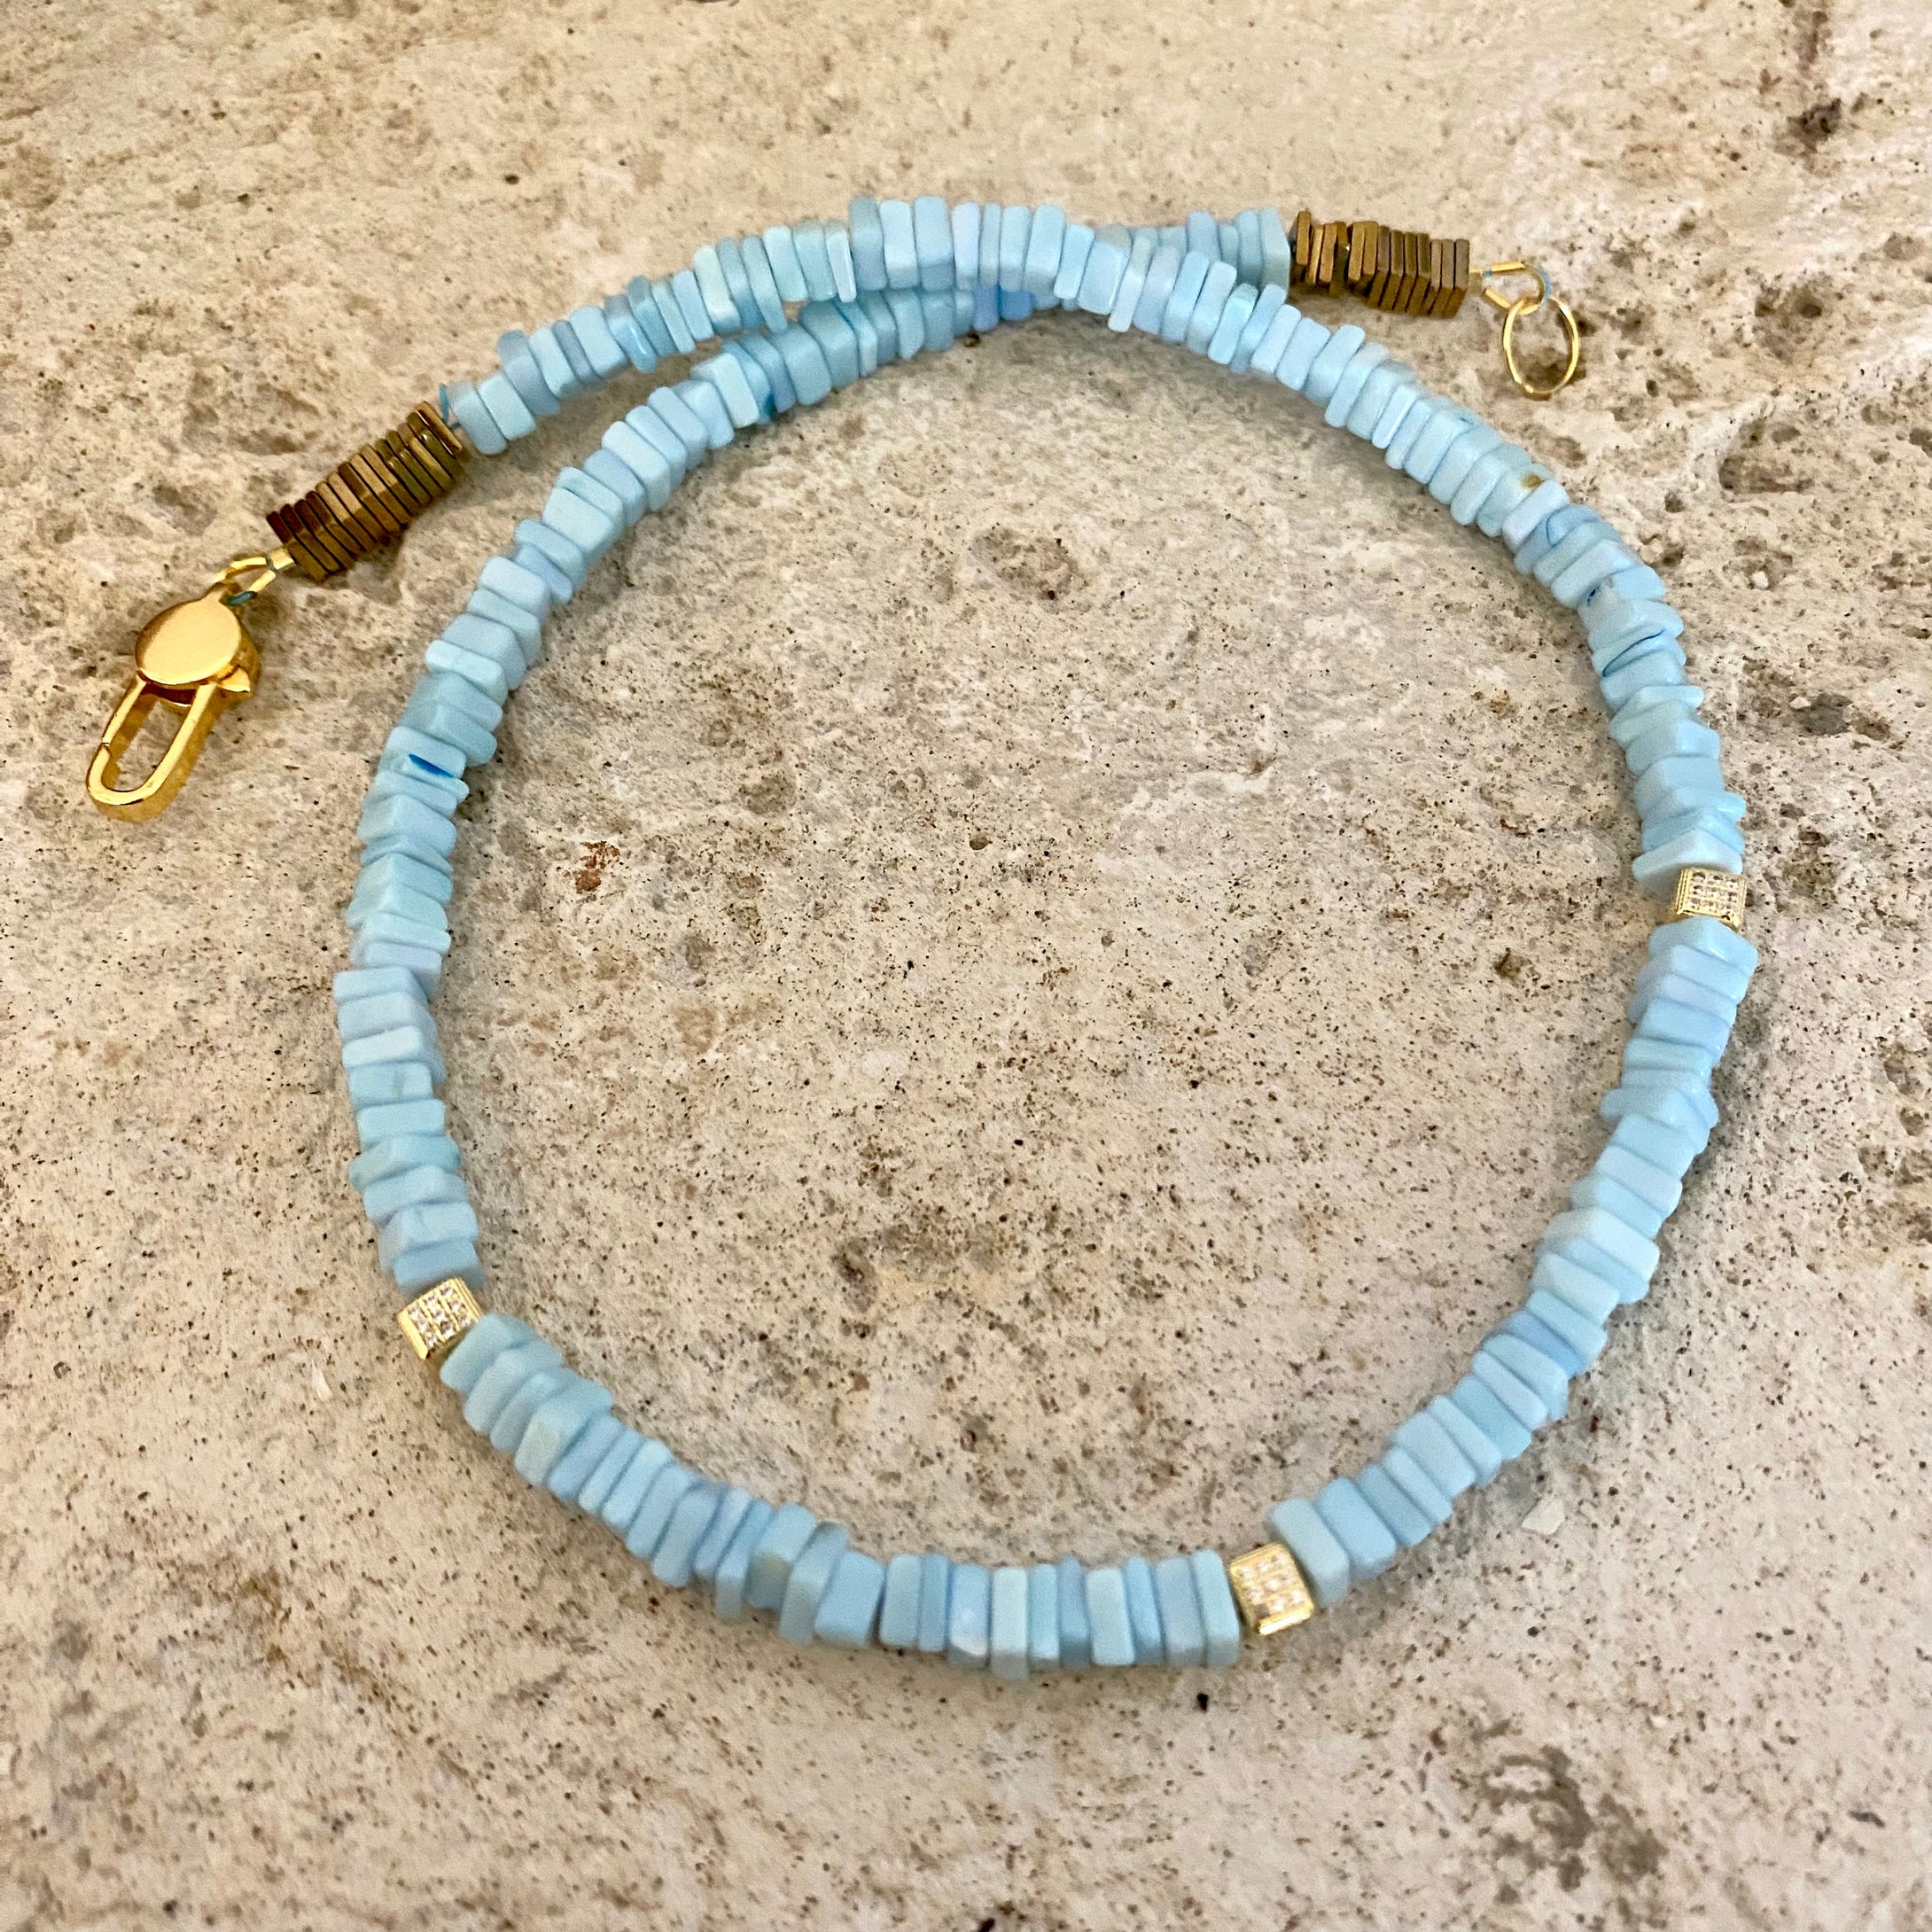 Blue Peru Opal Choker Necklace with Gold Vermeil Details and Lobster Clasp, 16